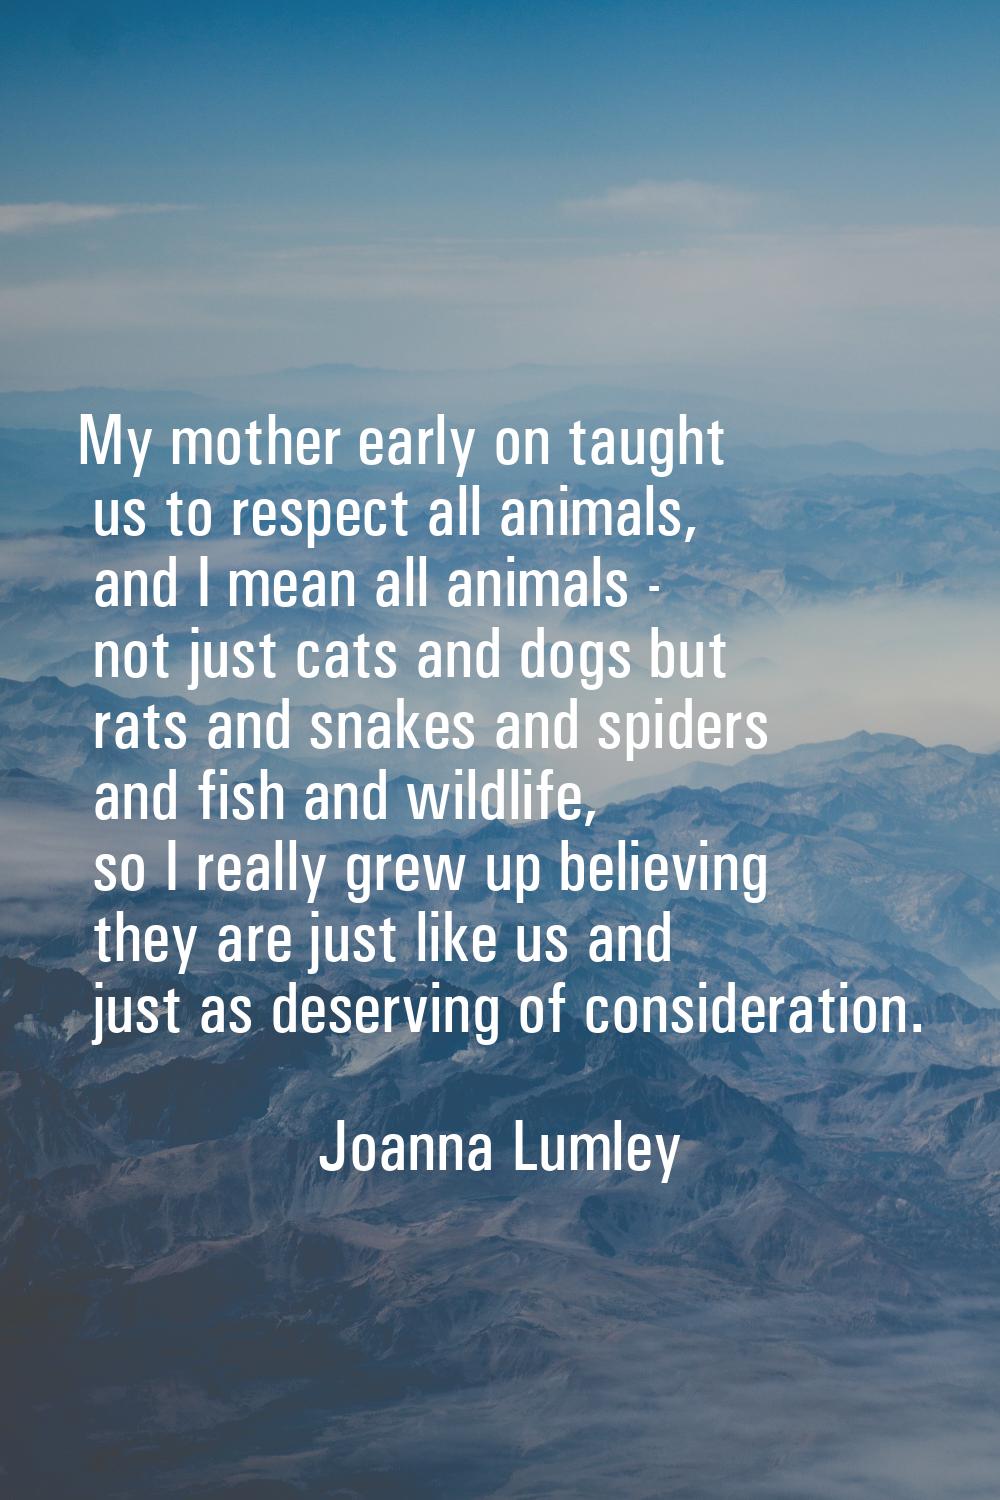 My mother early on taught us to respect all animals, and I mean all animals - not just cats and dog